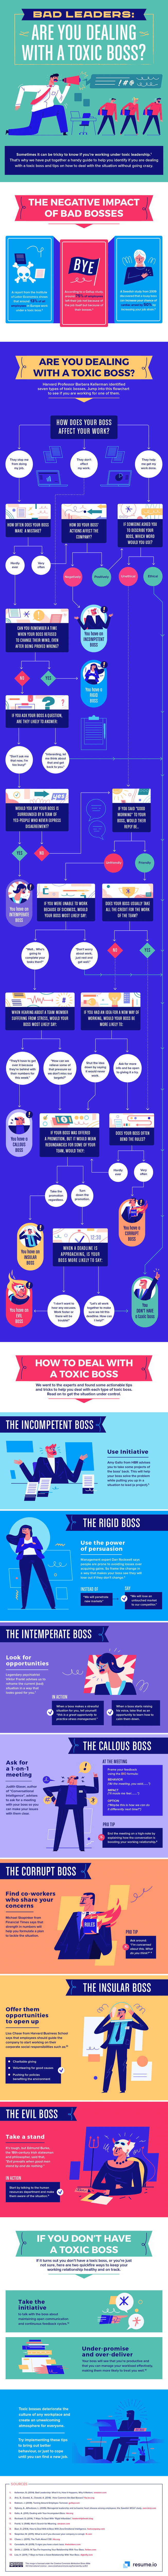 Resume.io infographic on recognising and dealing with a toxic boss.